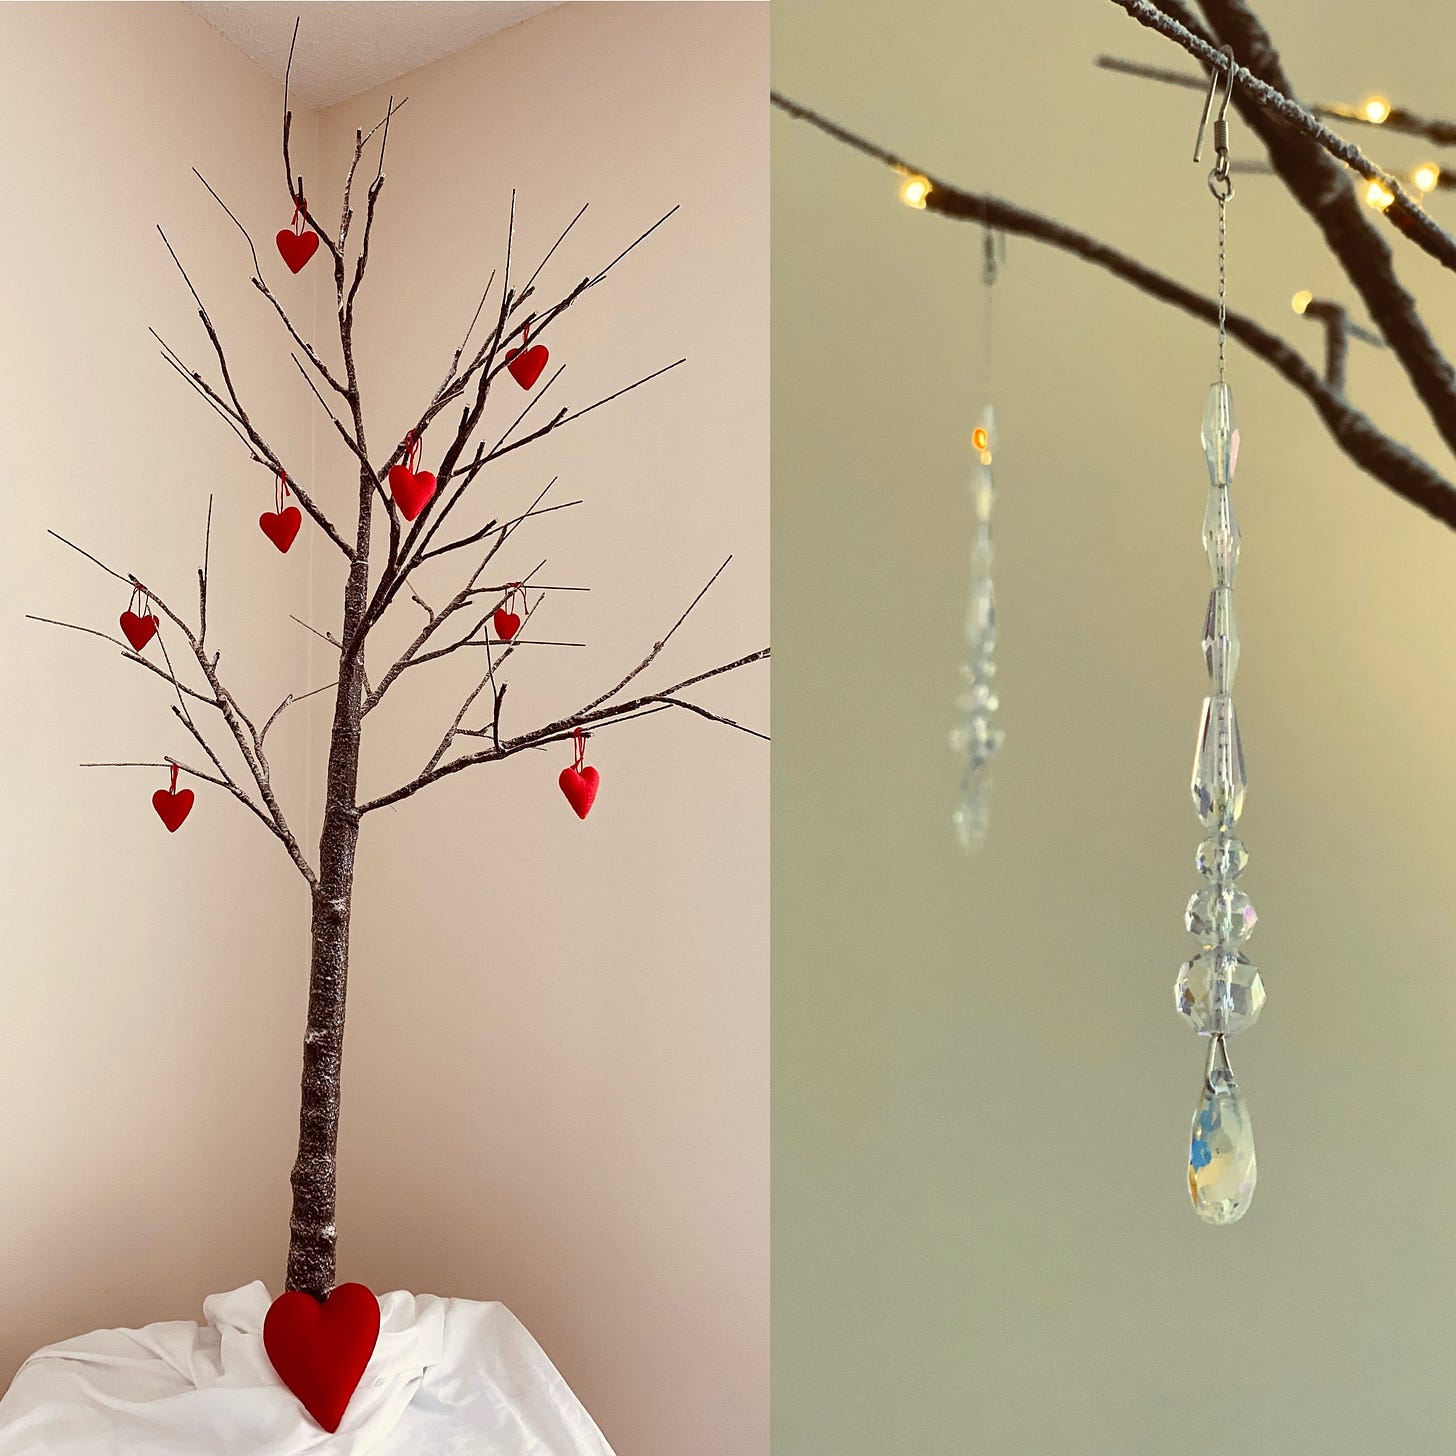 Diptych showing the twig tree hung with red felt hearts on the left and a closeup of dangling lead-crystal ornaments on its branches on the right